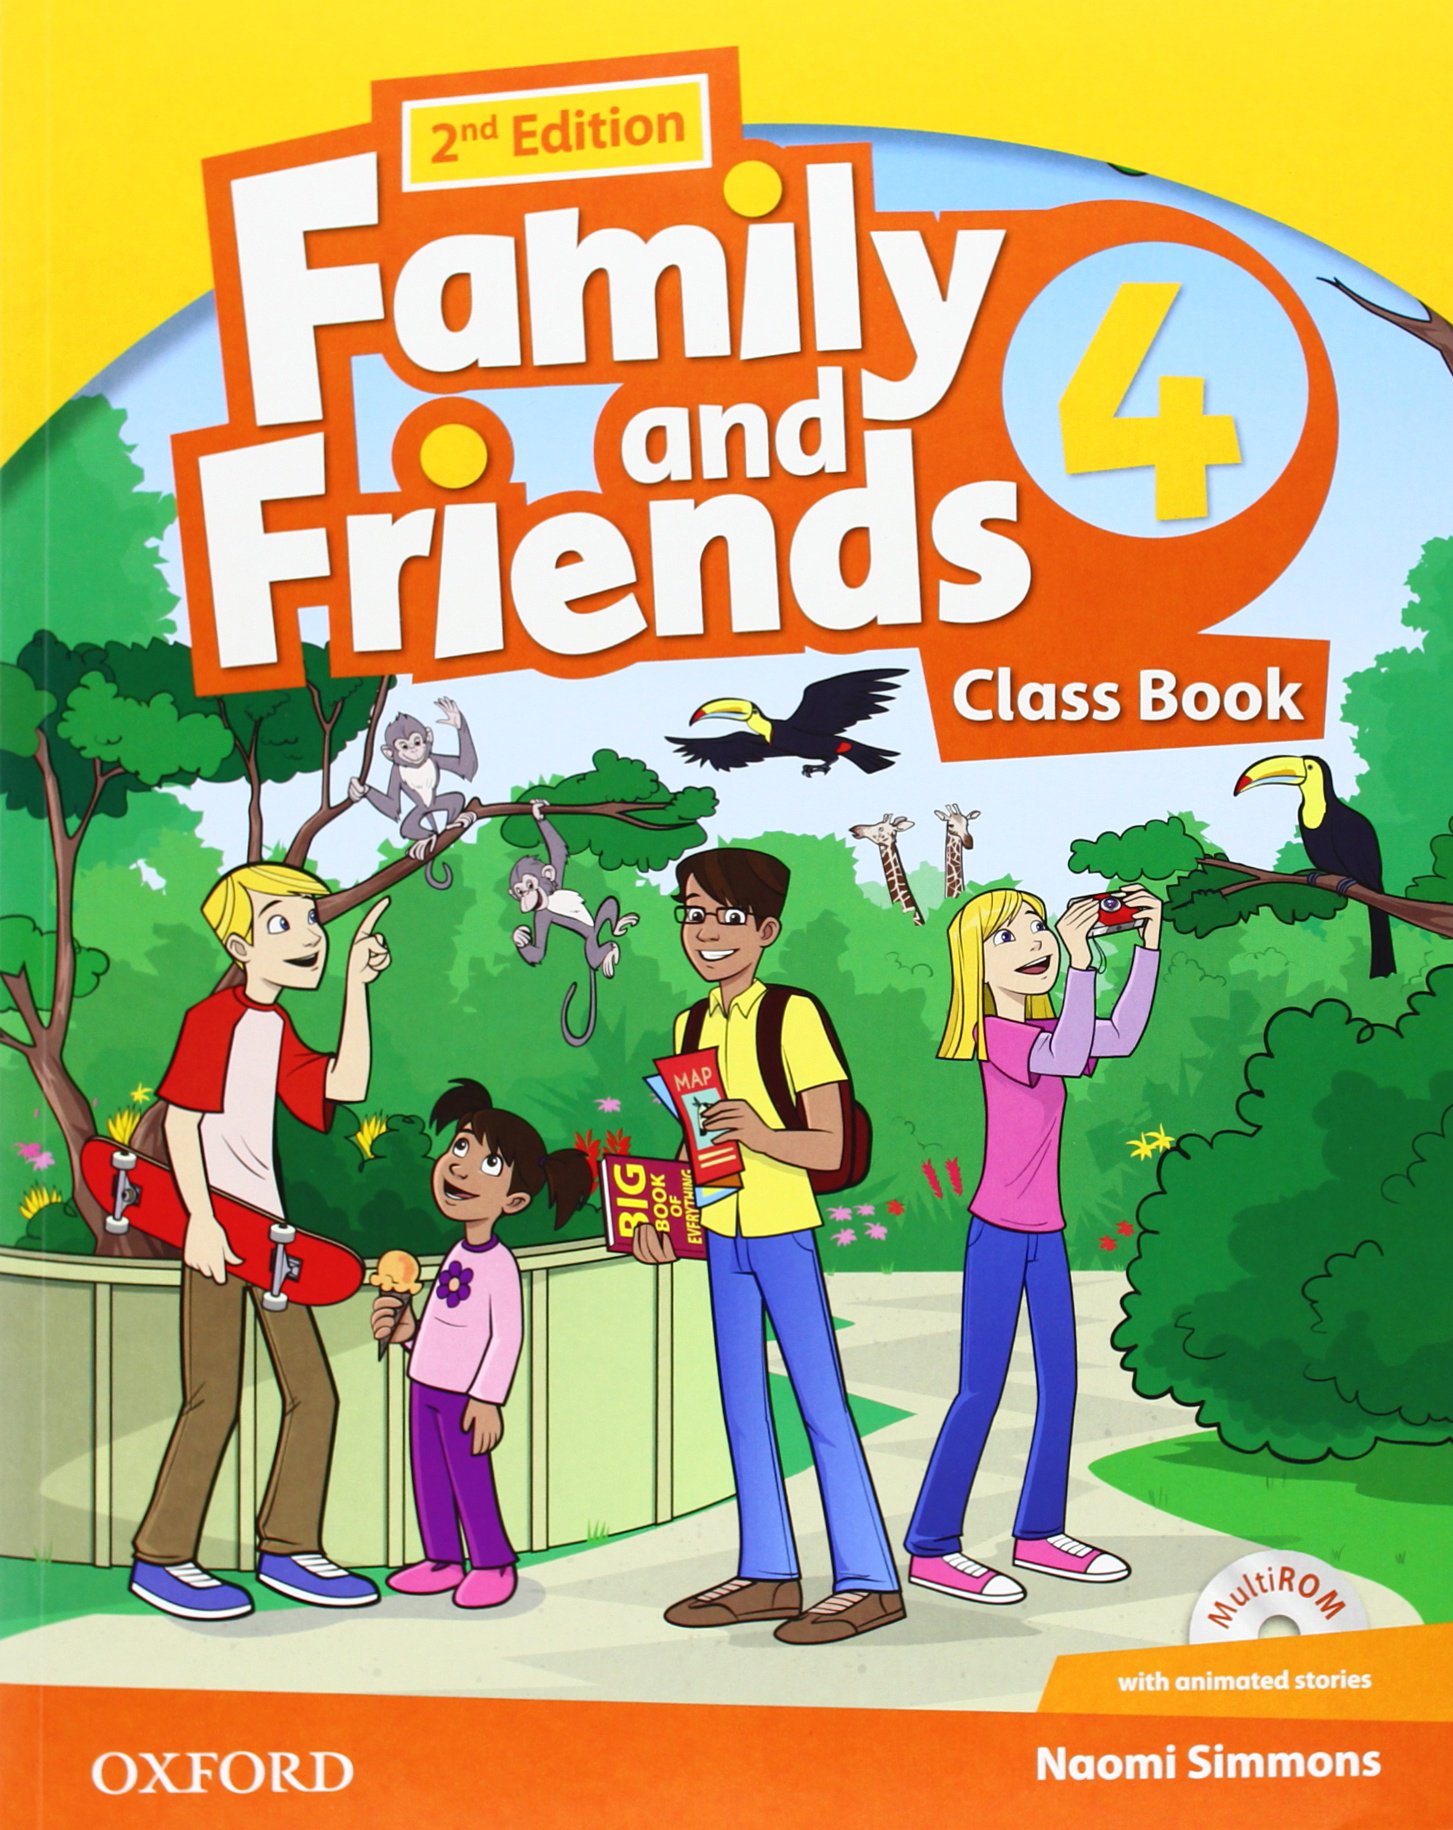 family-and-friends-4-class-book_PROD_1438252622